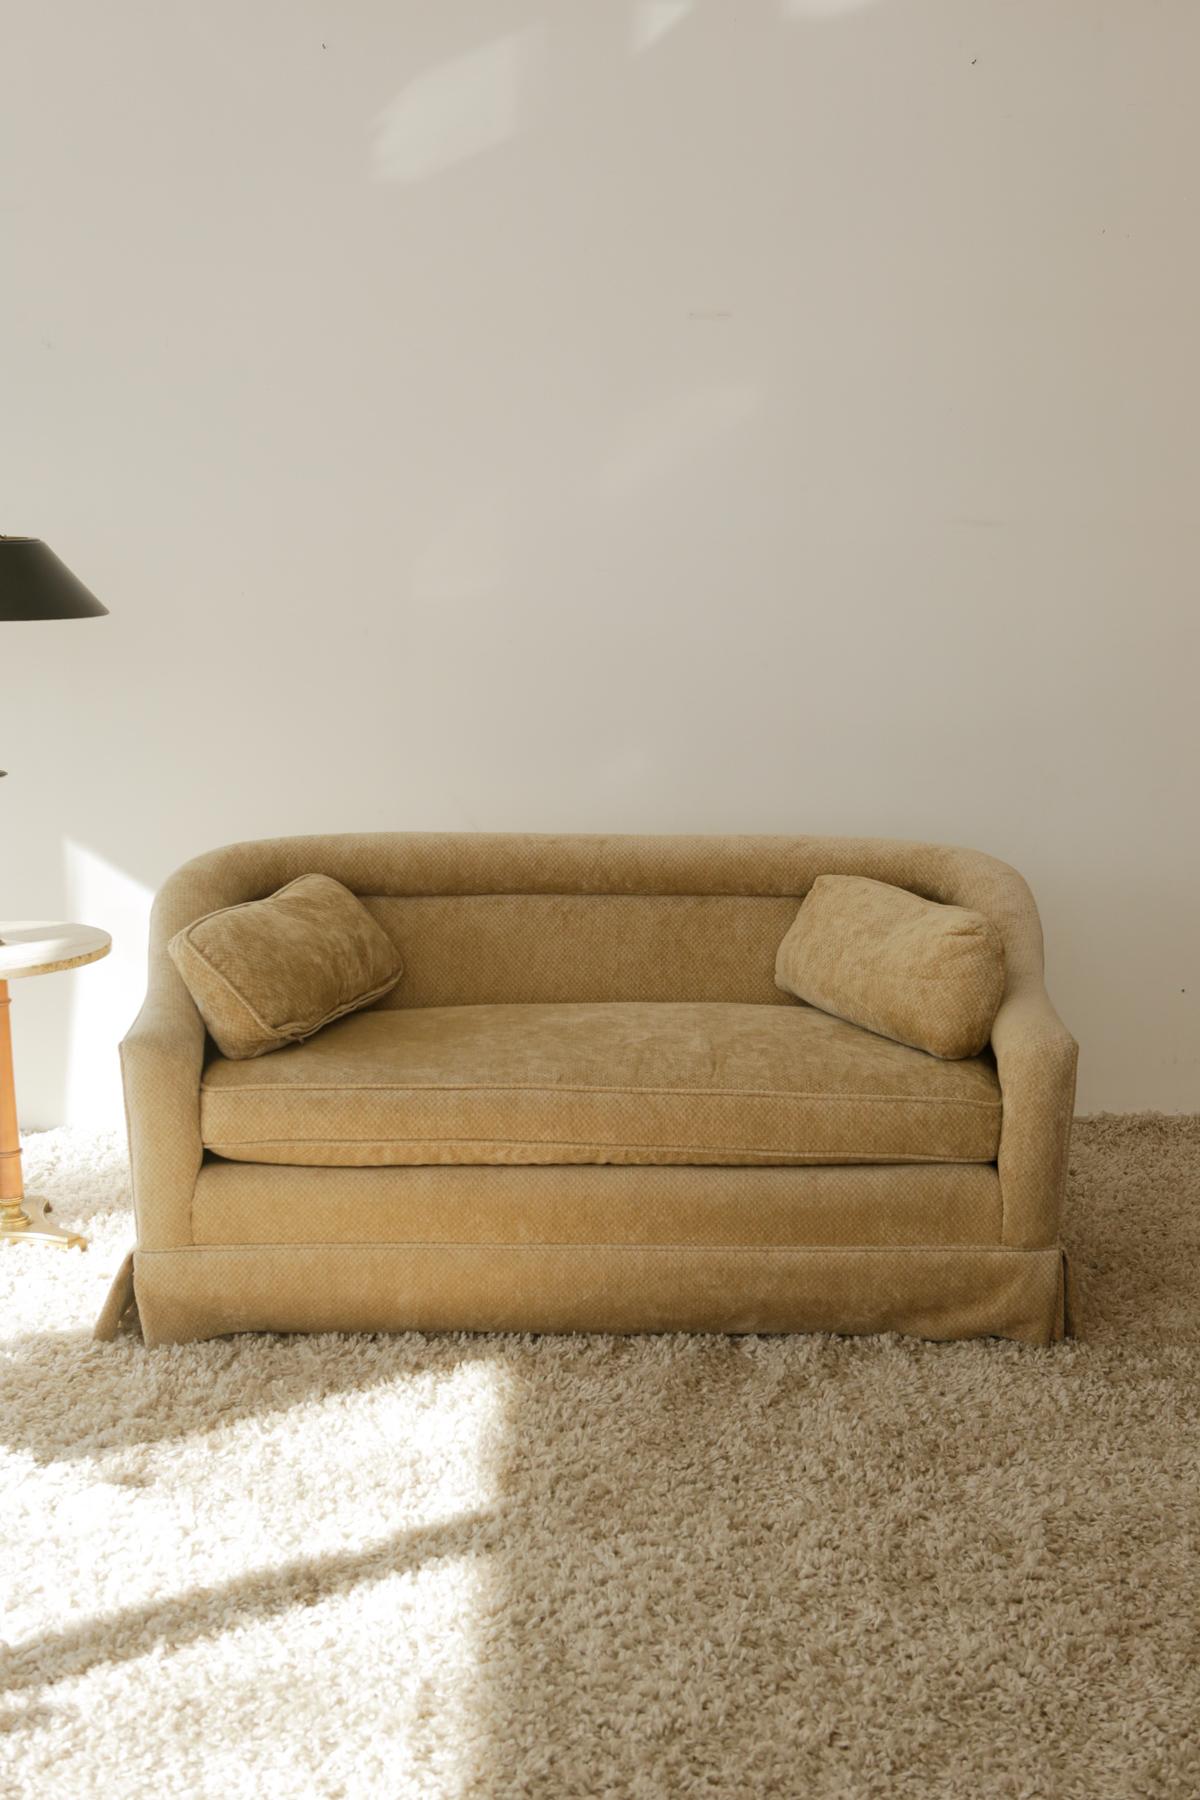 Where there’s a living room, there’s a sofa and many memories to be made.

This retro 80’s custom made love sofa is upholstered in a durable velvet tan fabric. Elegantly curved back and arms. Super comfortable with plush cushions. One of a kind.